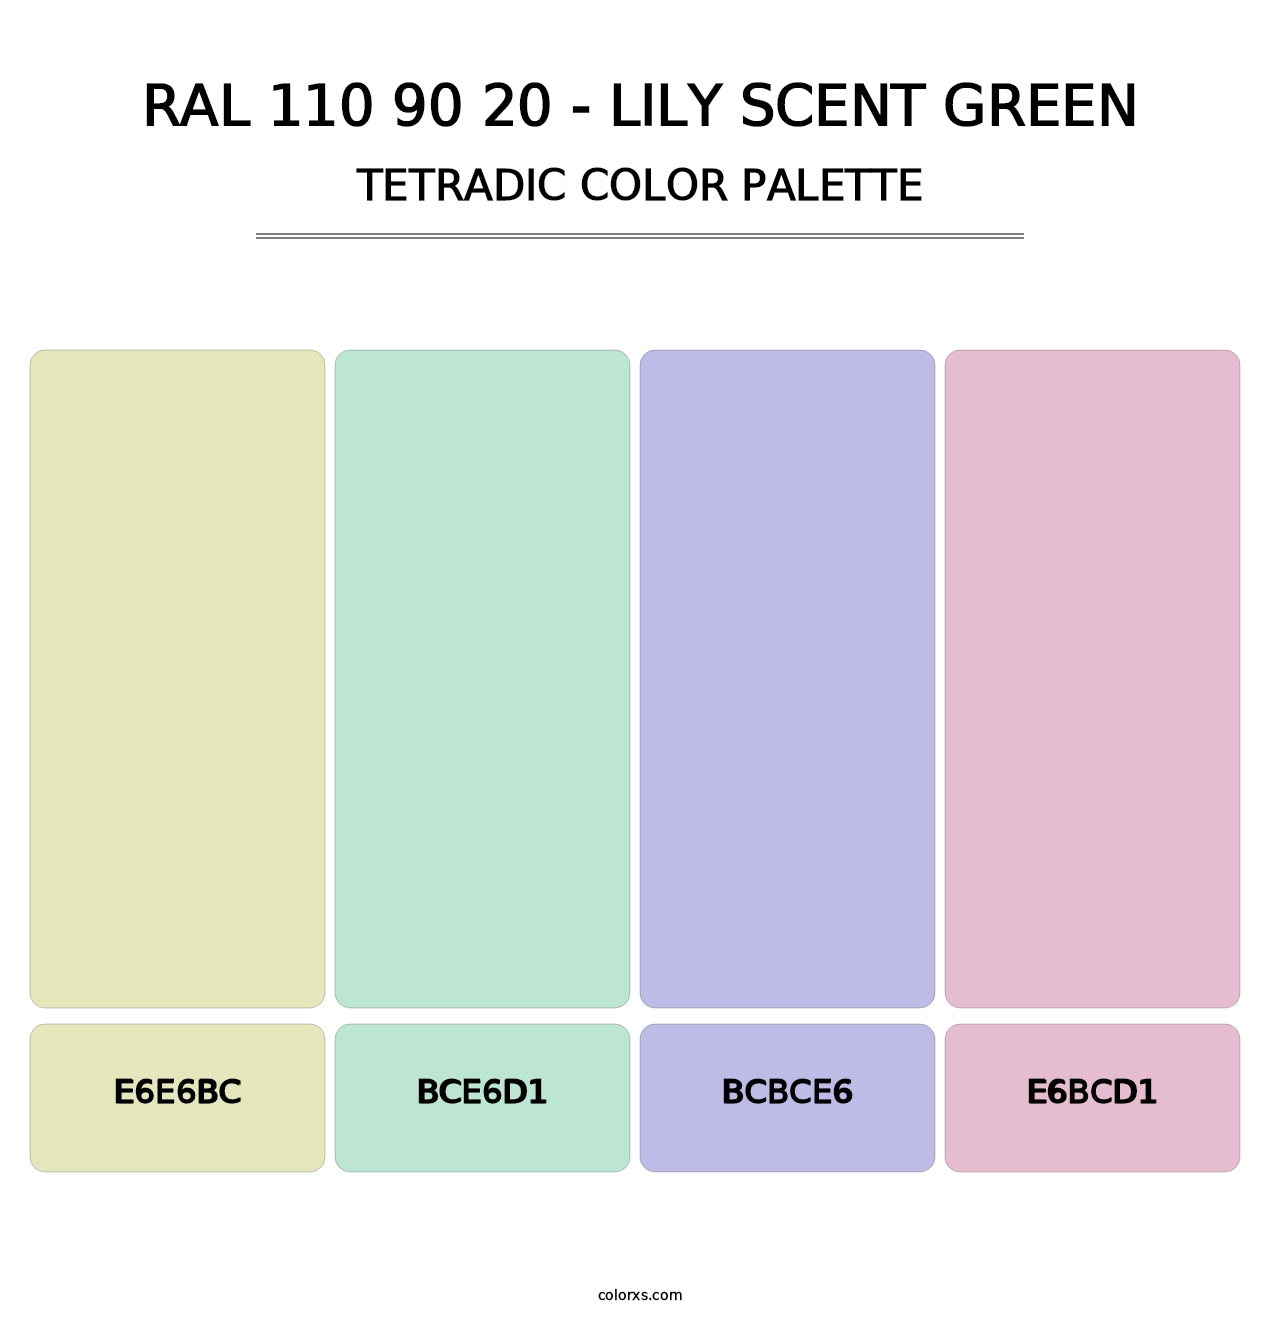 RAL 110 90 20 - Lily Scent Green - Tetradic Color Palette